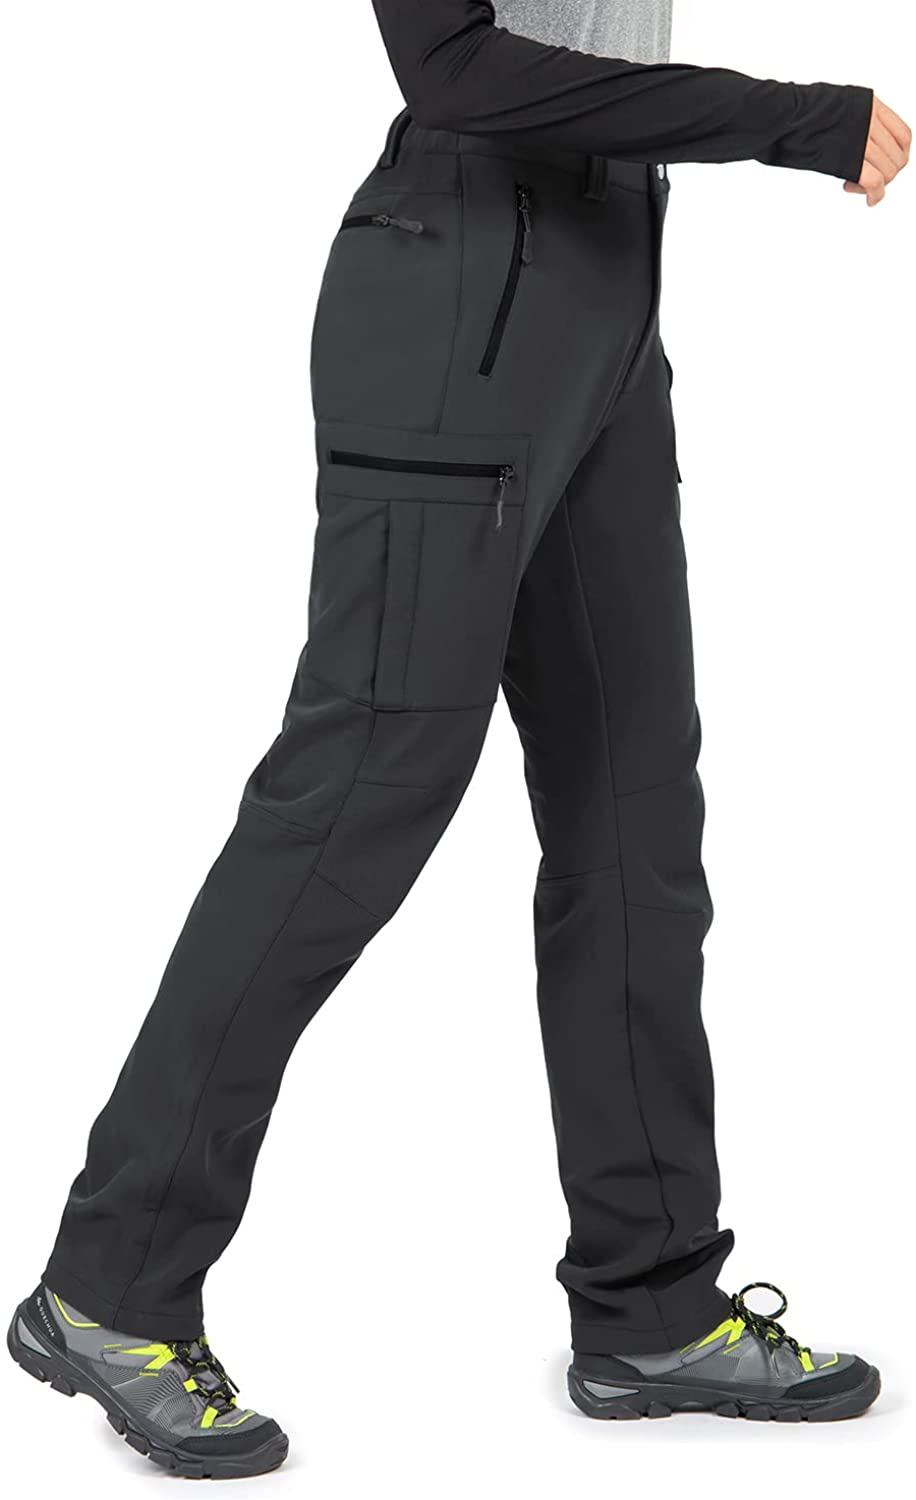 Free Country Women's Water & Wind Resistant Insulated Ski Pant (Black, L) 